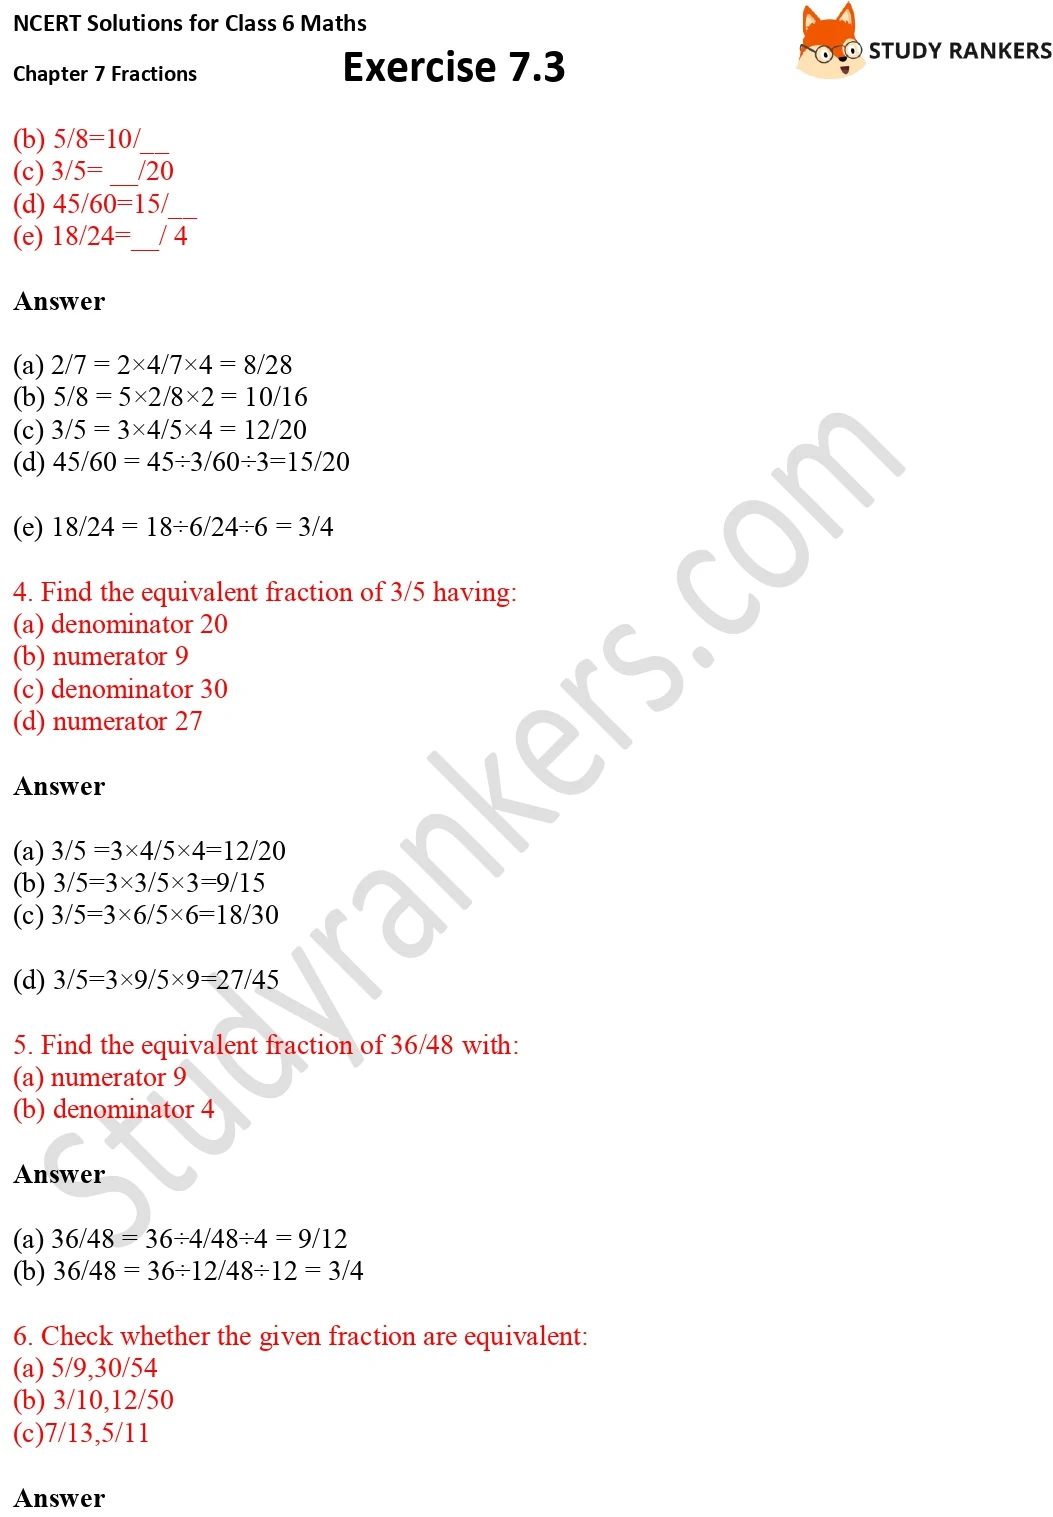 NCERT Solutions for Class 6 Maths Chapter 7 Fractions Exercise 7.3 Part 2